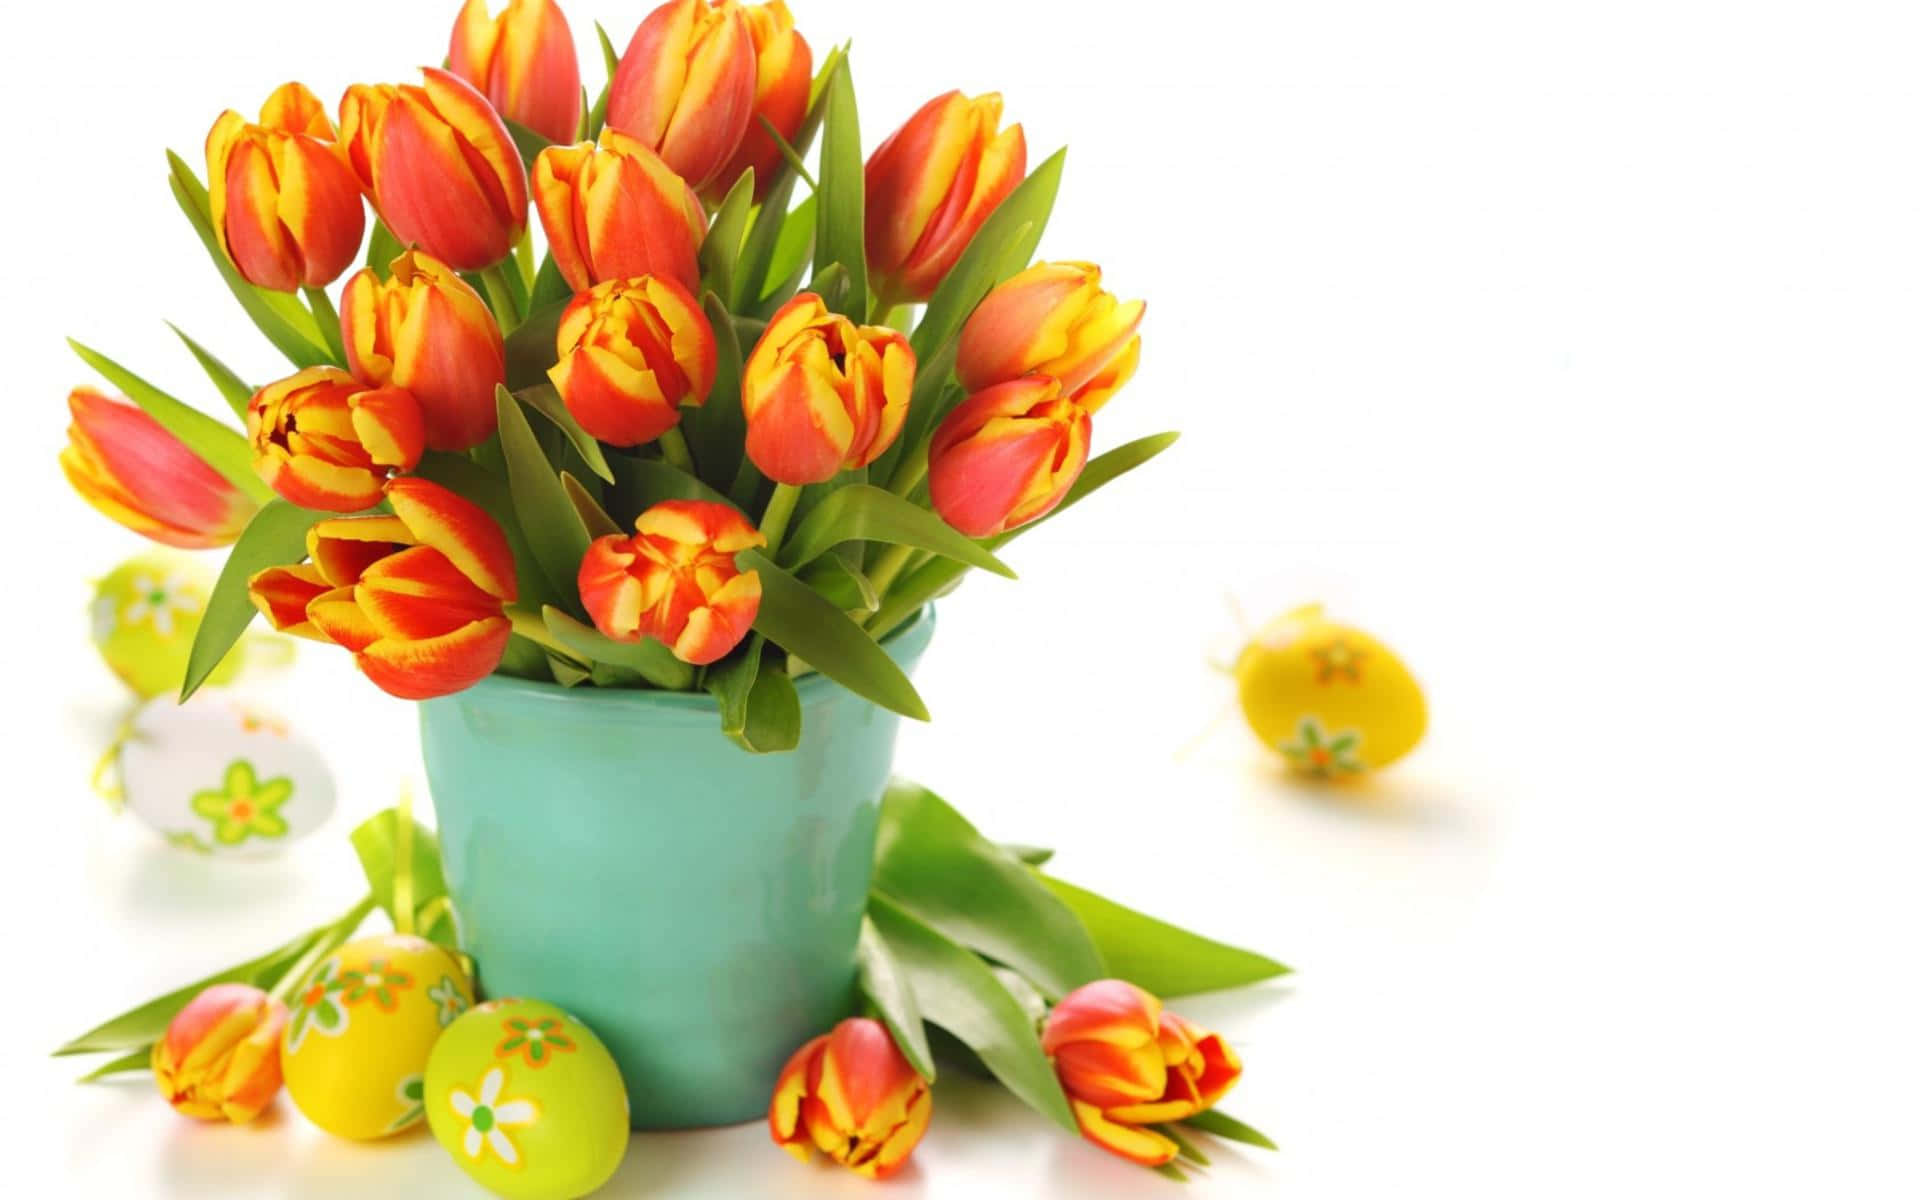 A Vase Of Orange Tulips With Easter Eggs